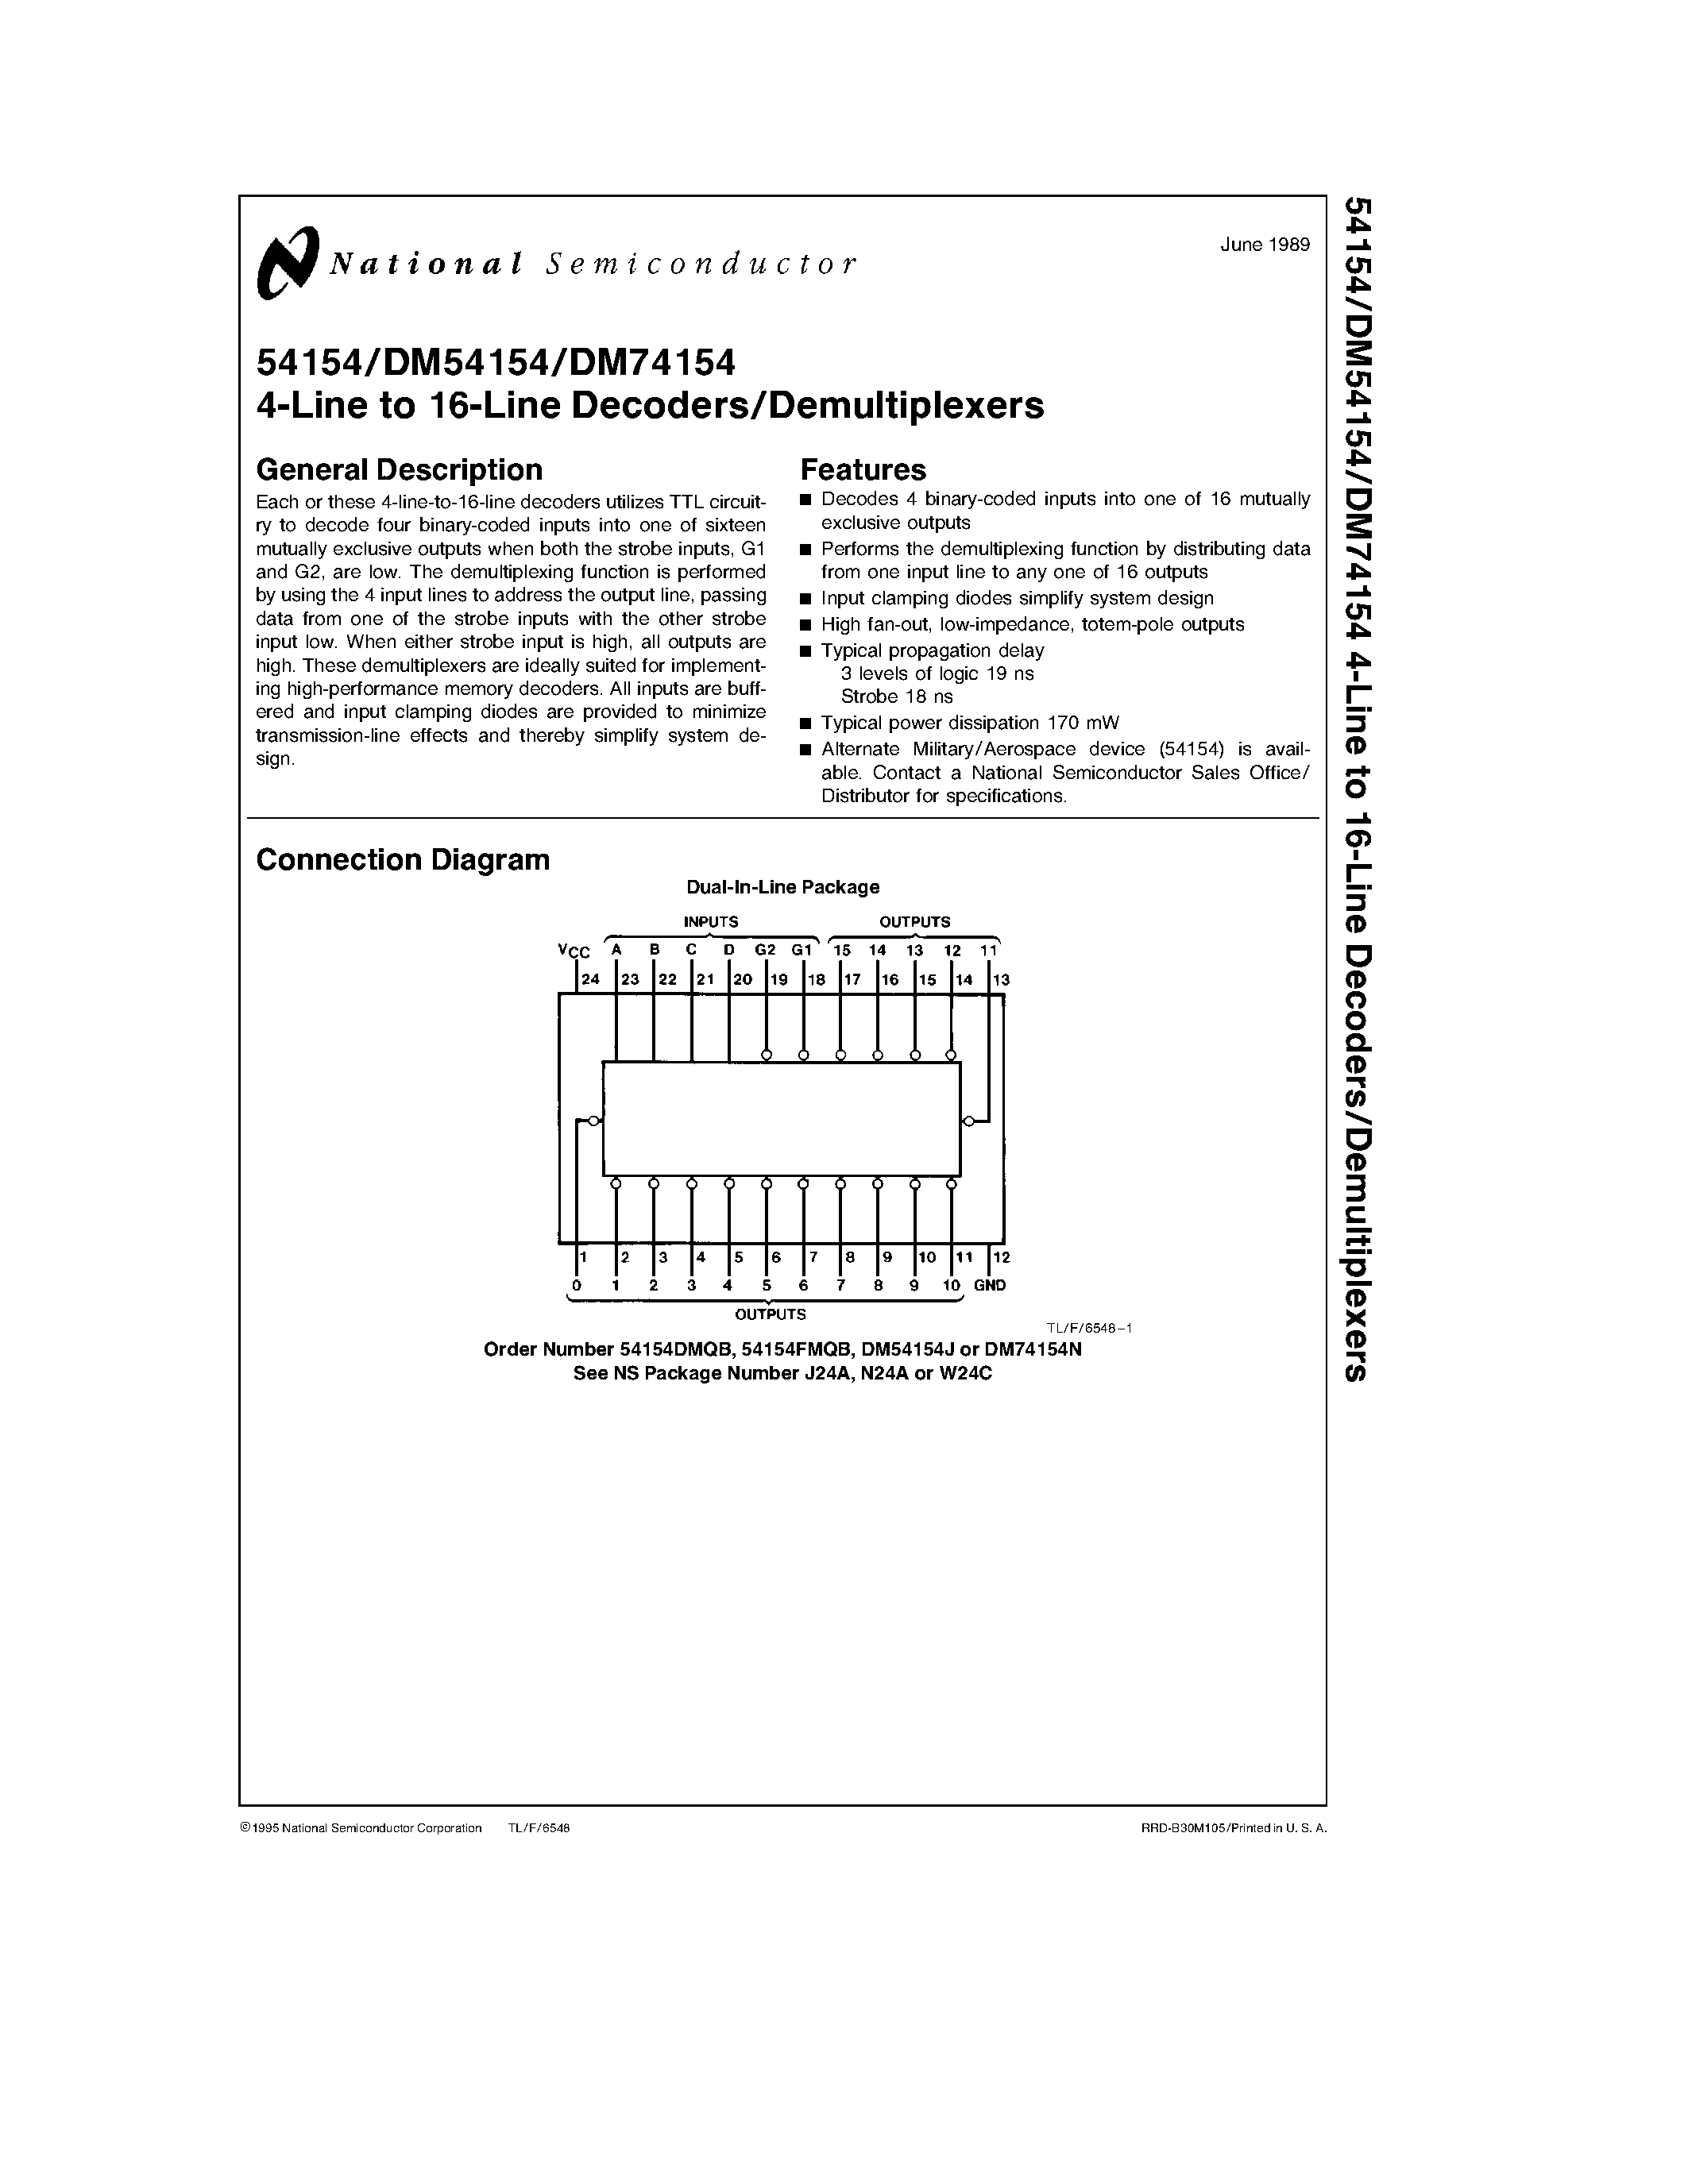 Datasheet 54154DMQB - 4-Line to 16-Line Decoders/Demultiplexers page 1